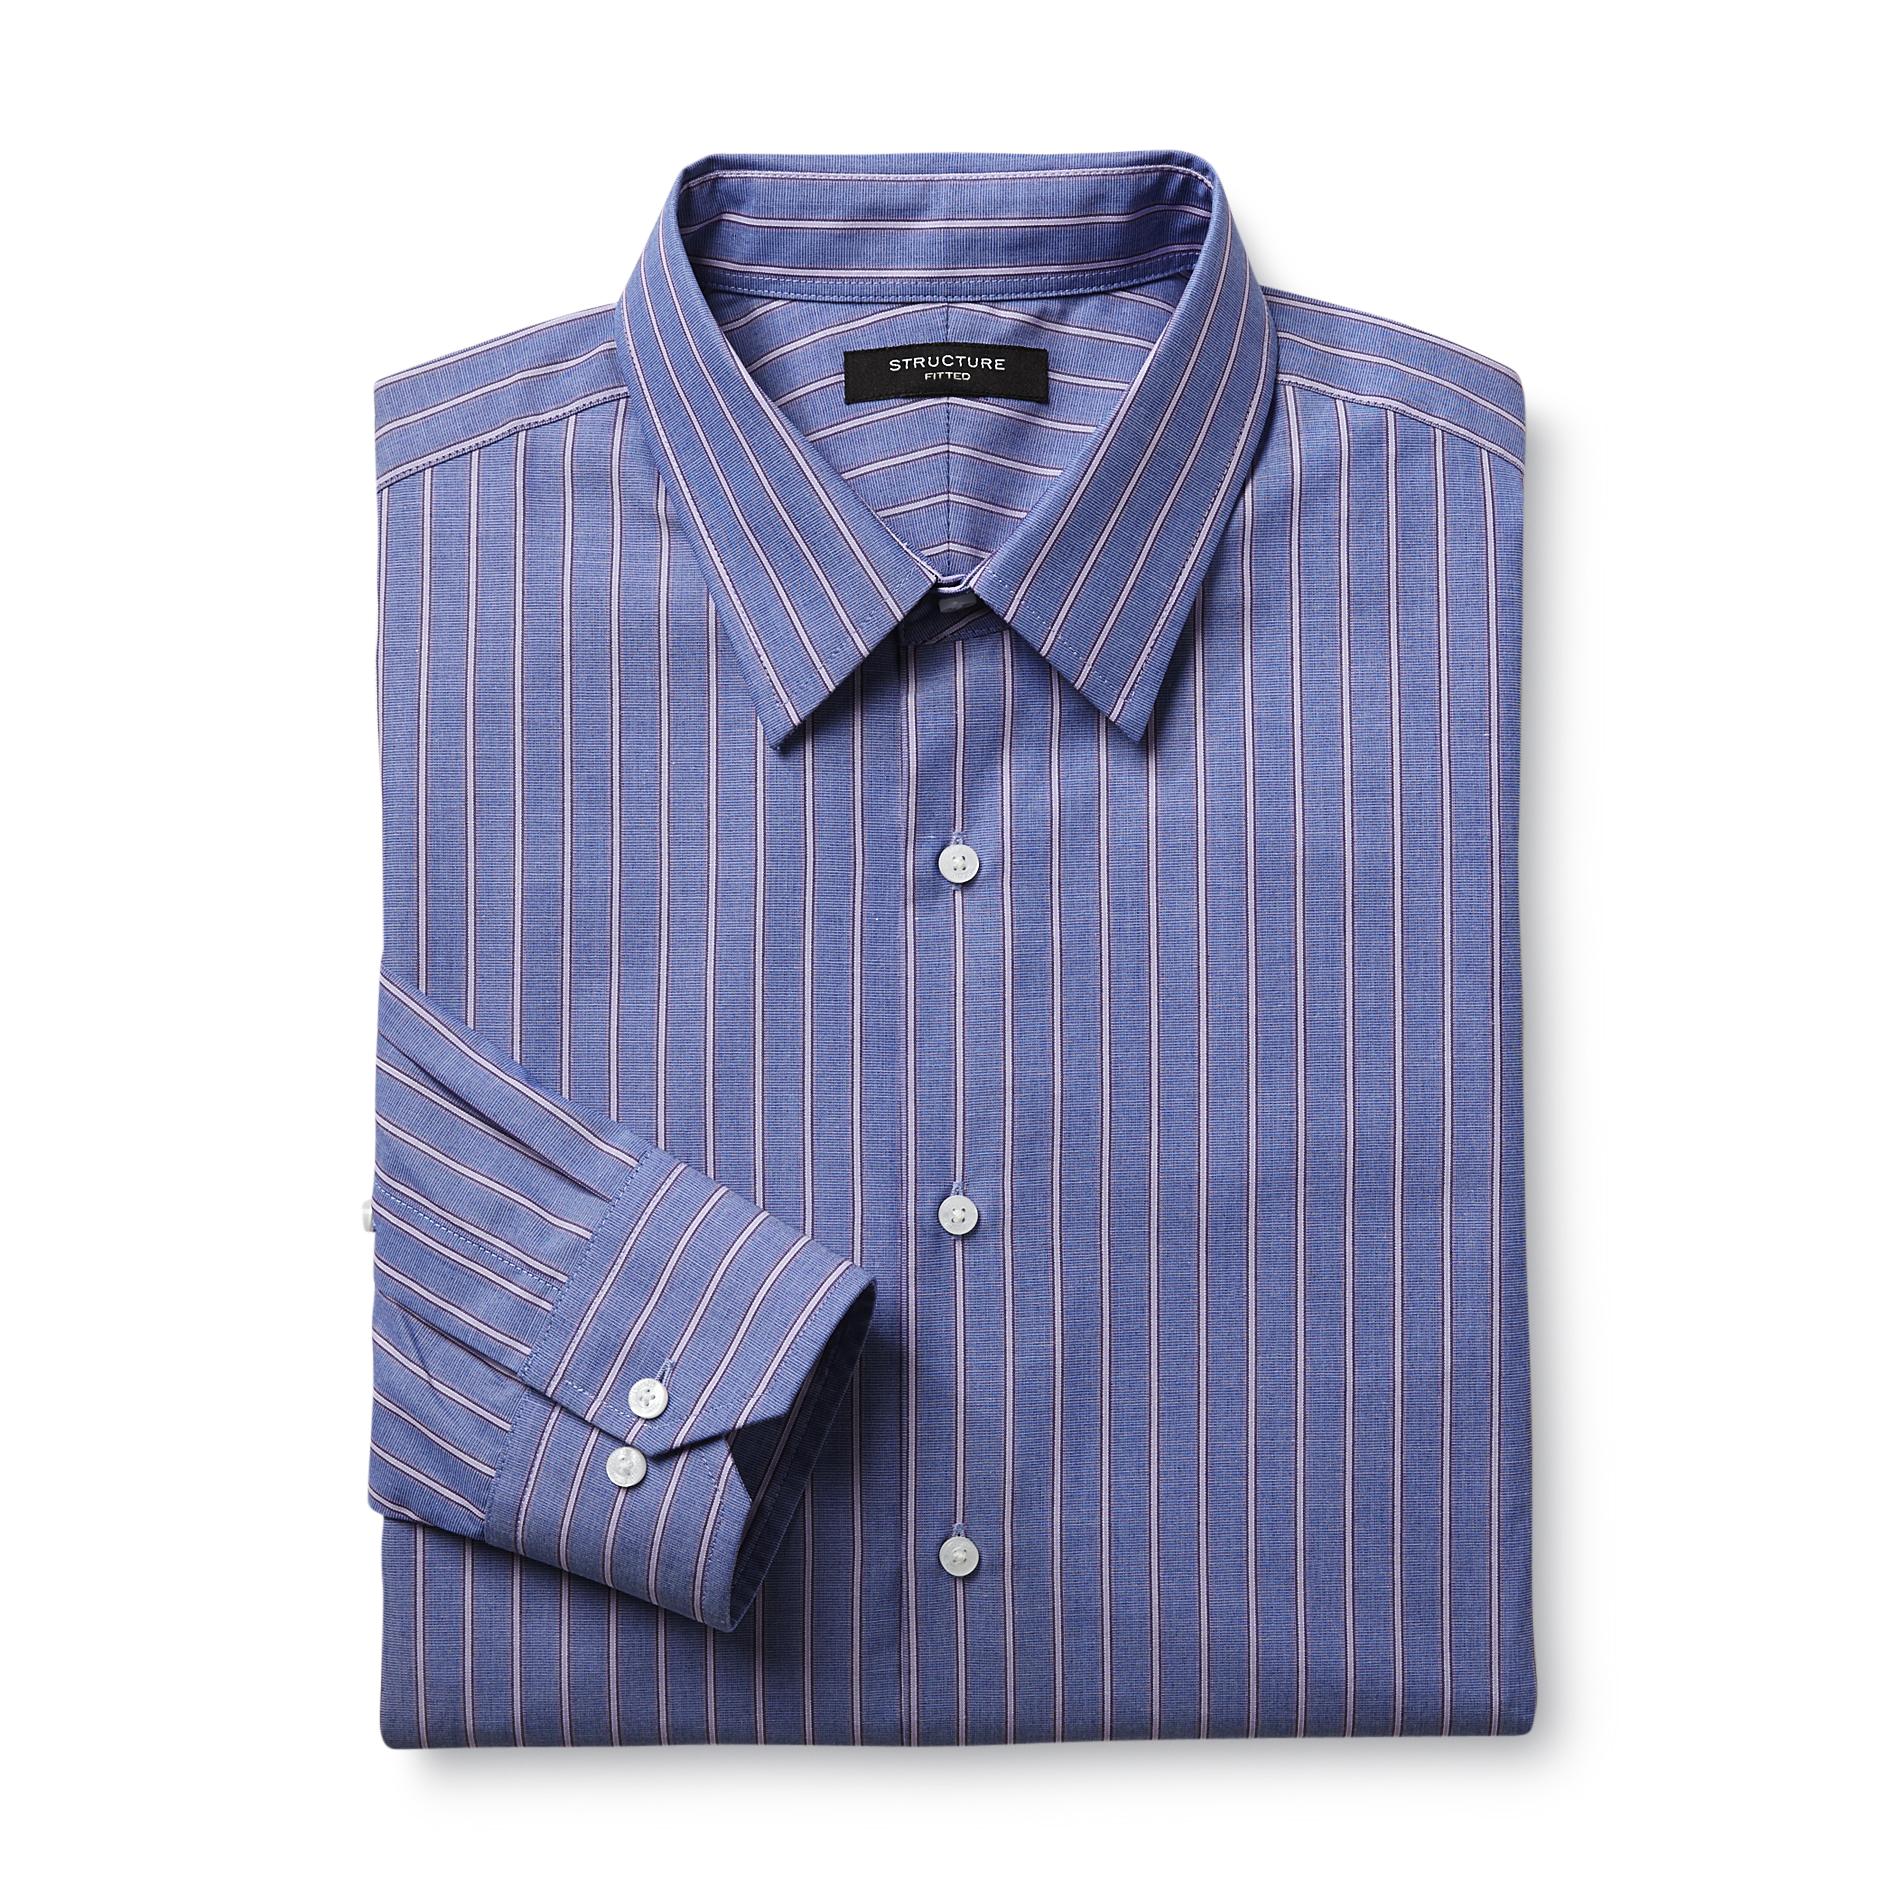 Structure Men's Fitted Wrinkle Free Dress Shirt - Stripes